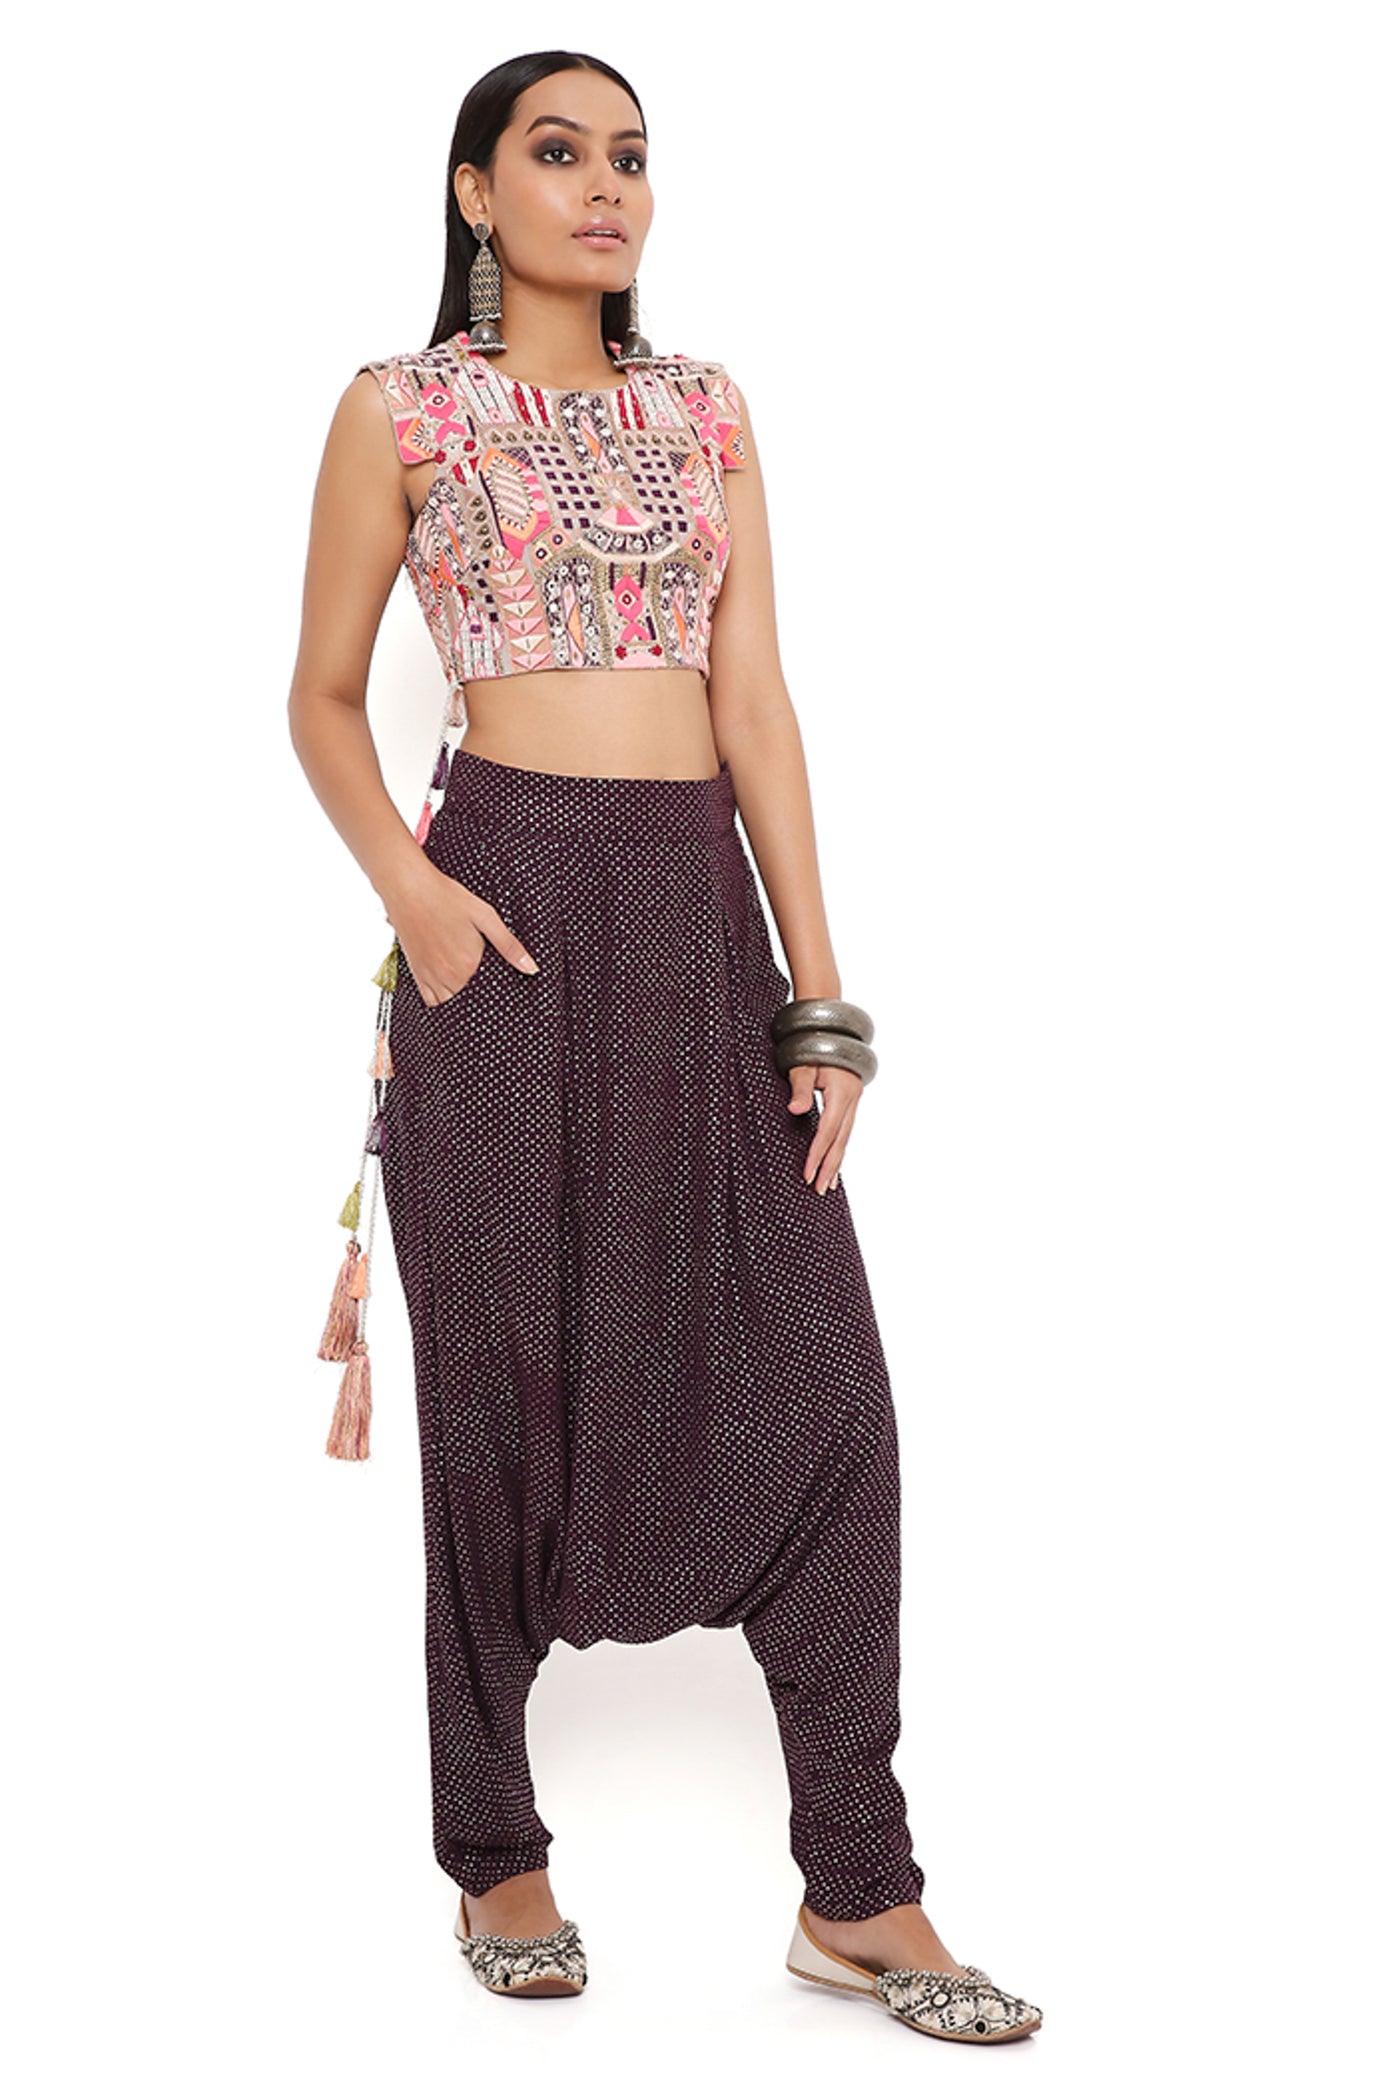 payal singhal Grey Georgette Embroidered Crop Top With Purple Mukaish Georgette Low Crotch Pants festive indian designer wear online shopping melange singapore